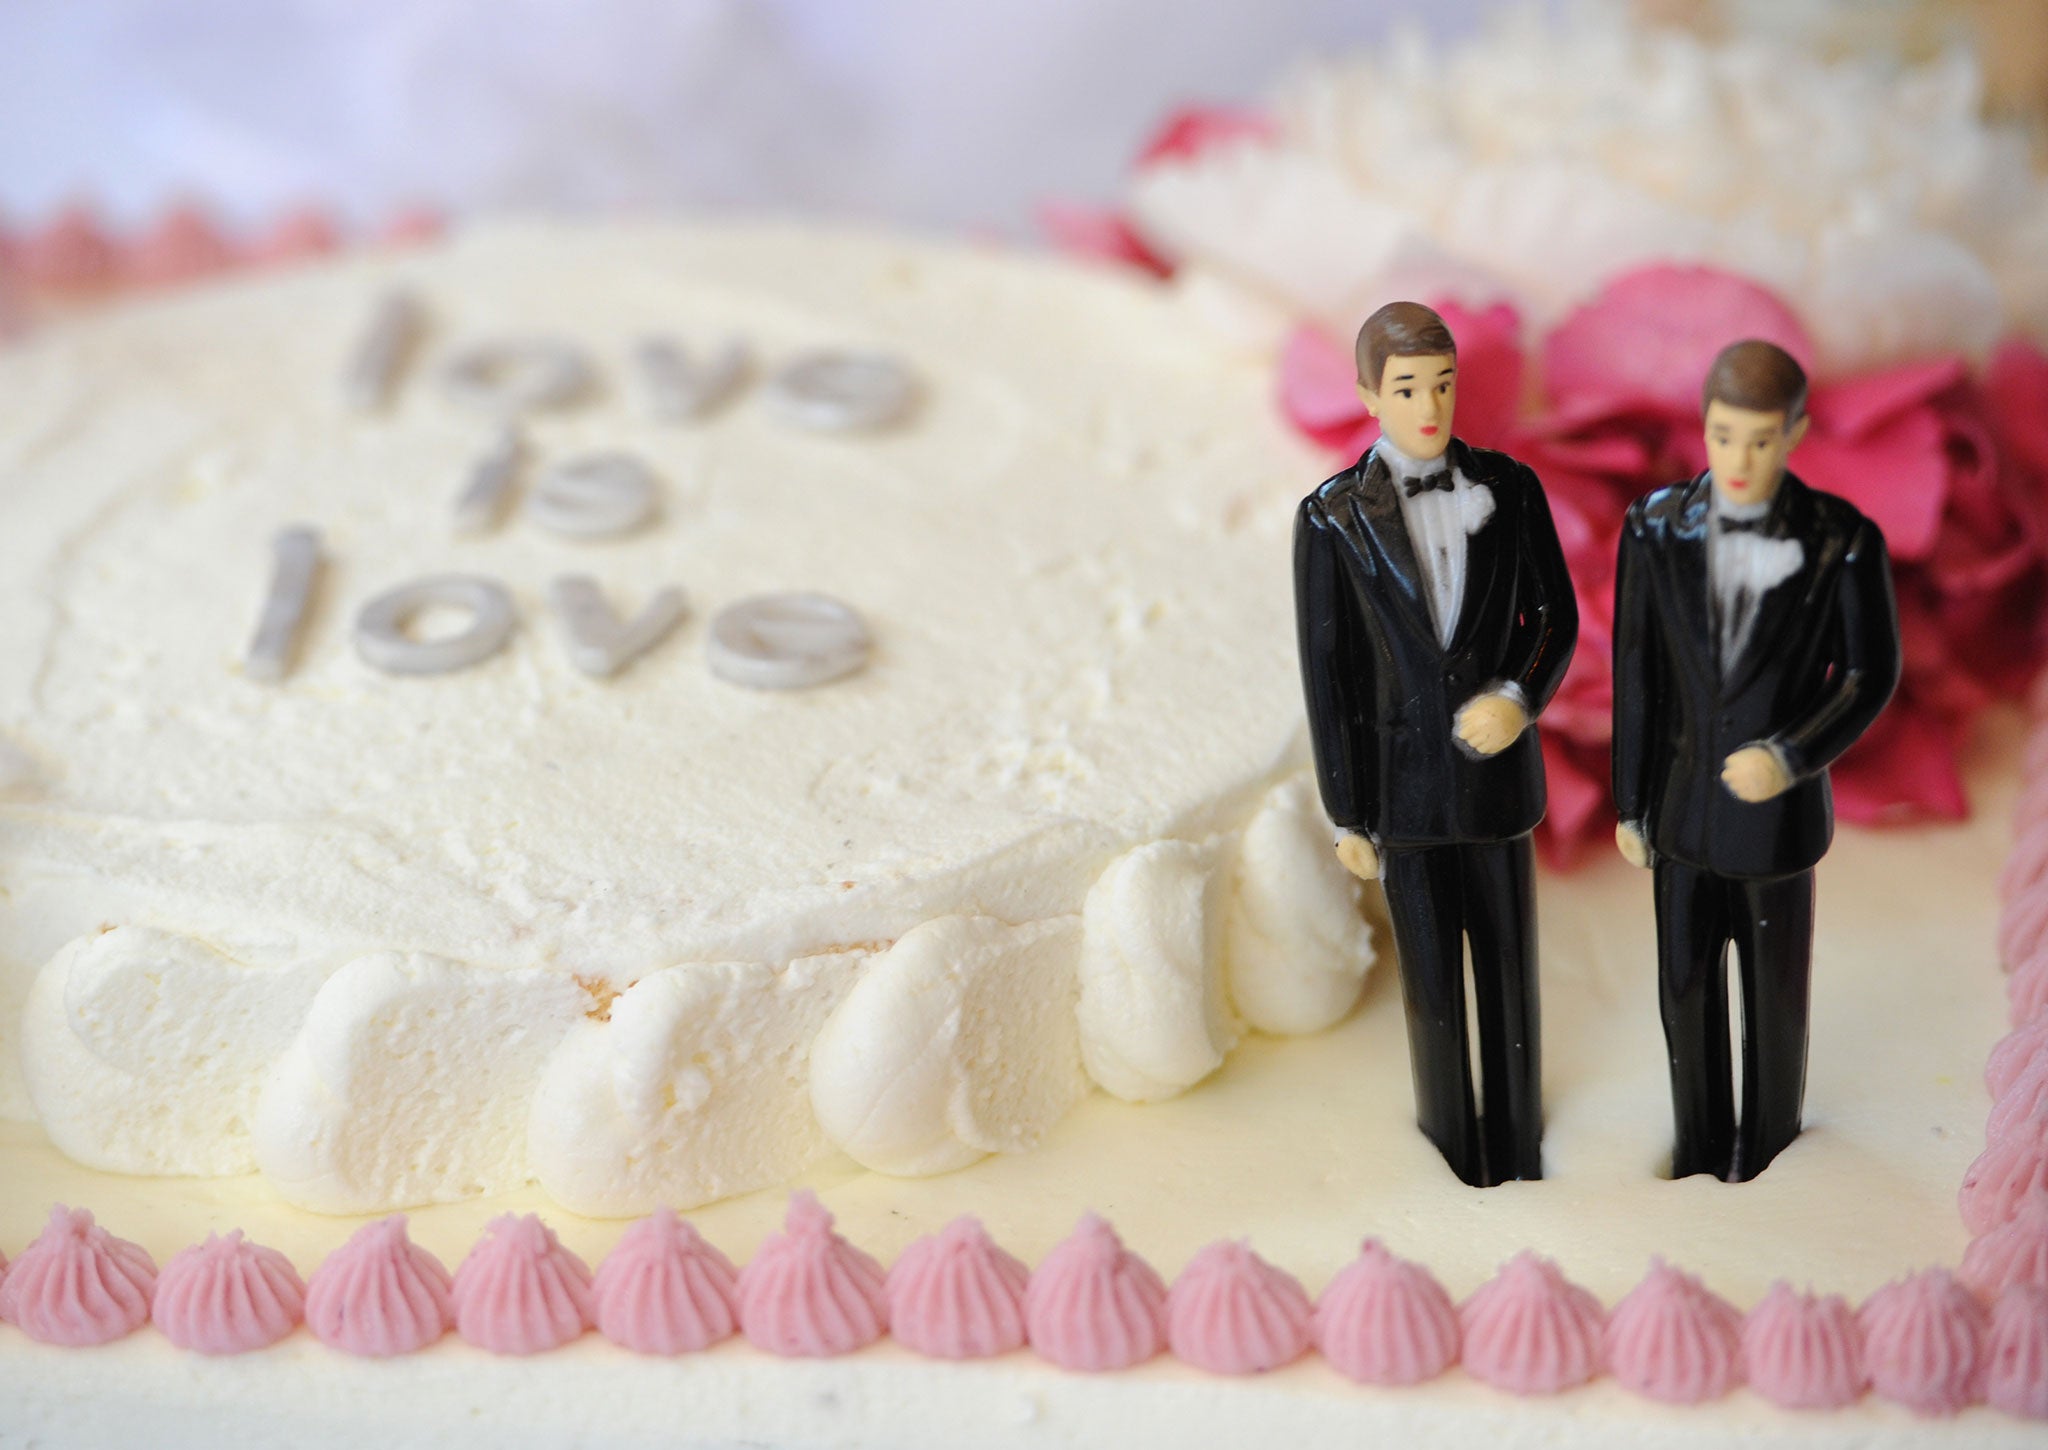 Here's a "gay cake" we made earlier.